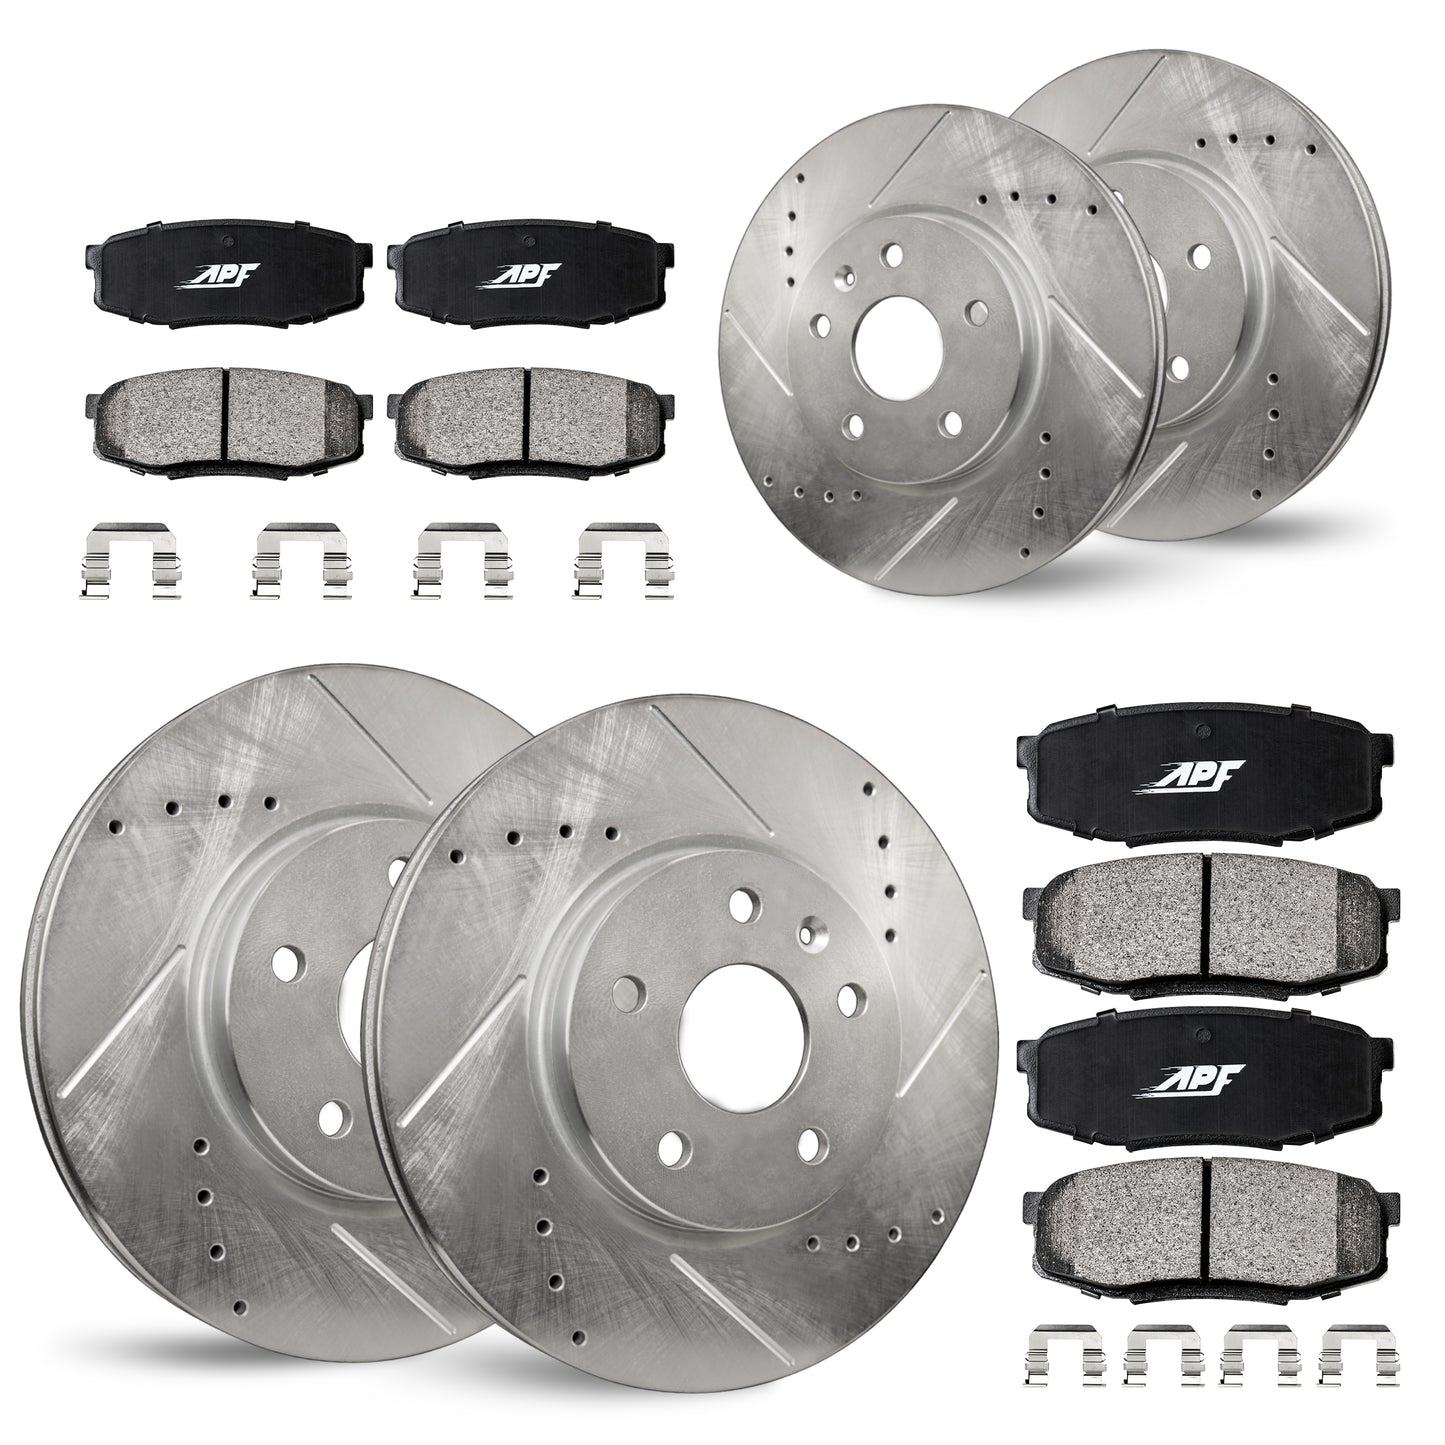 APF Full Kit compatible with Kia Soul 2014-2016 | Zinc Drilled Slotted Rotors with Ceramic Carbon Fiber Brake Pads